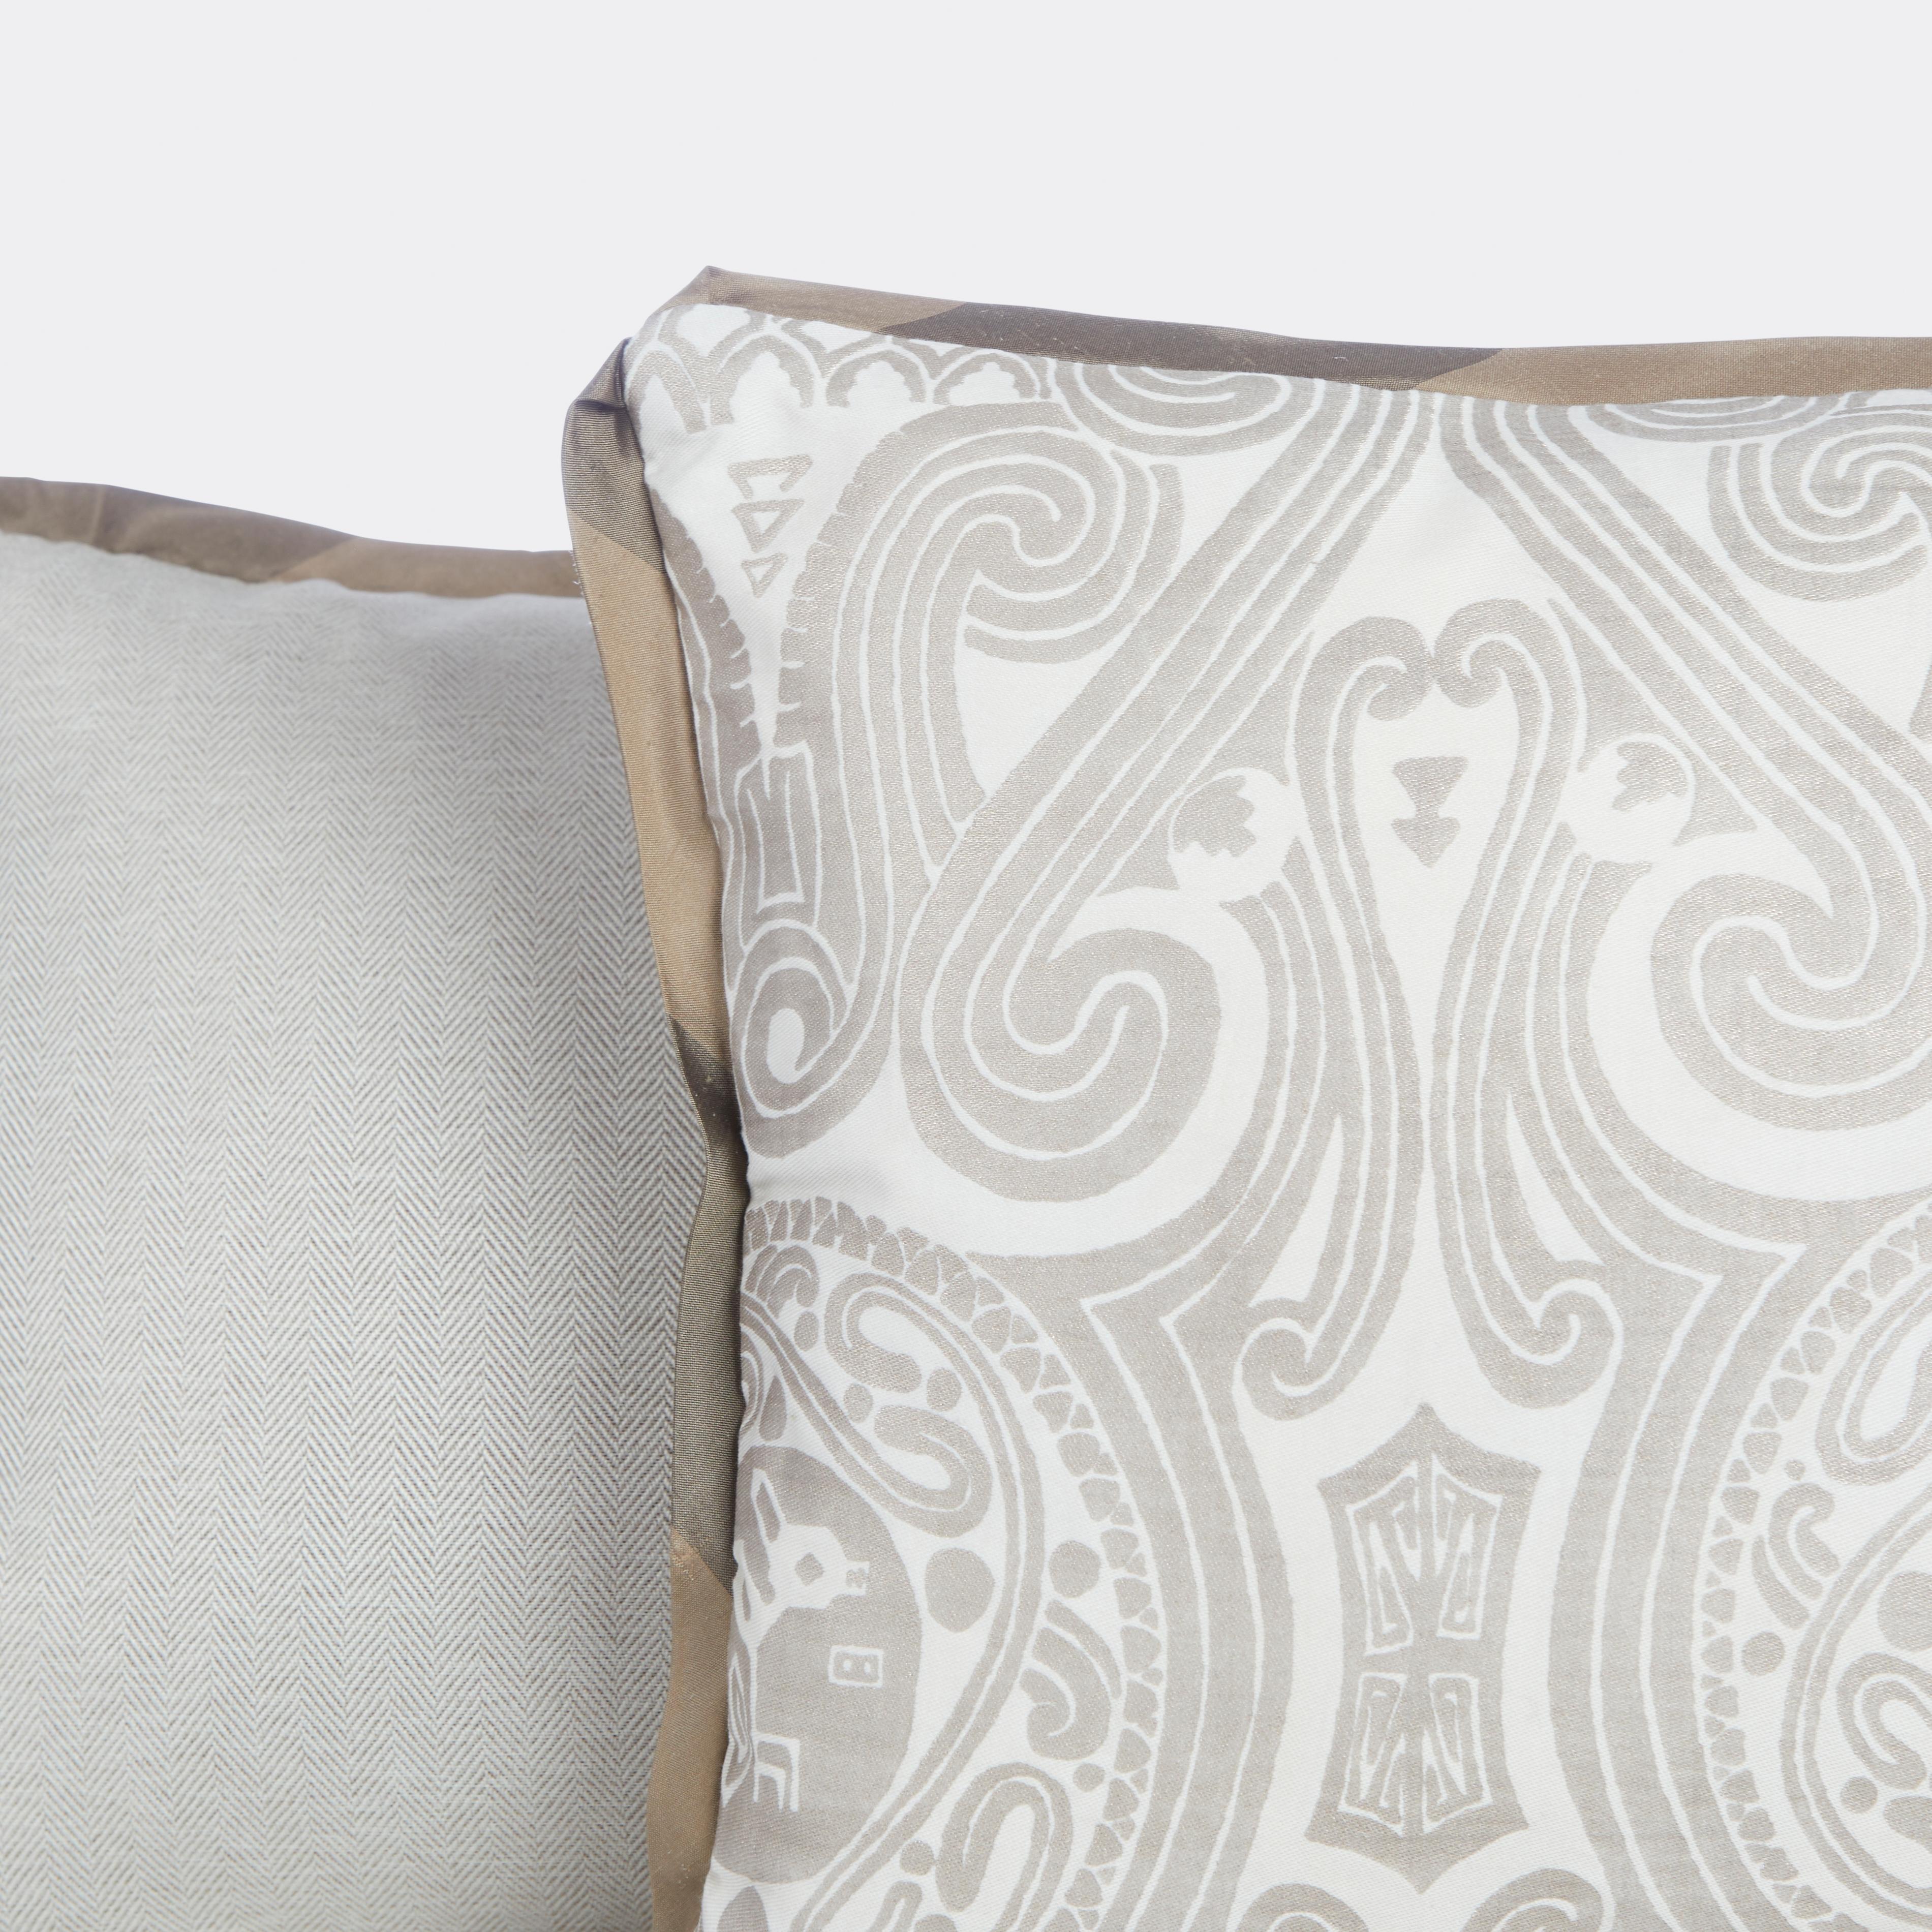 Contemporary Pair of Fortuny Peruviano Lumbar Cushions Ion Silvery Gold on White David Duncan